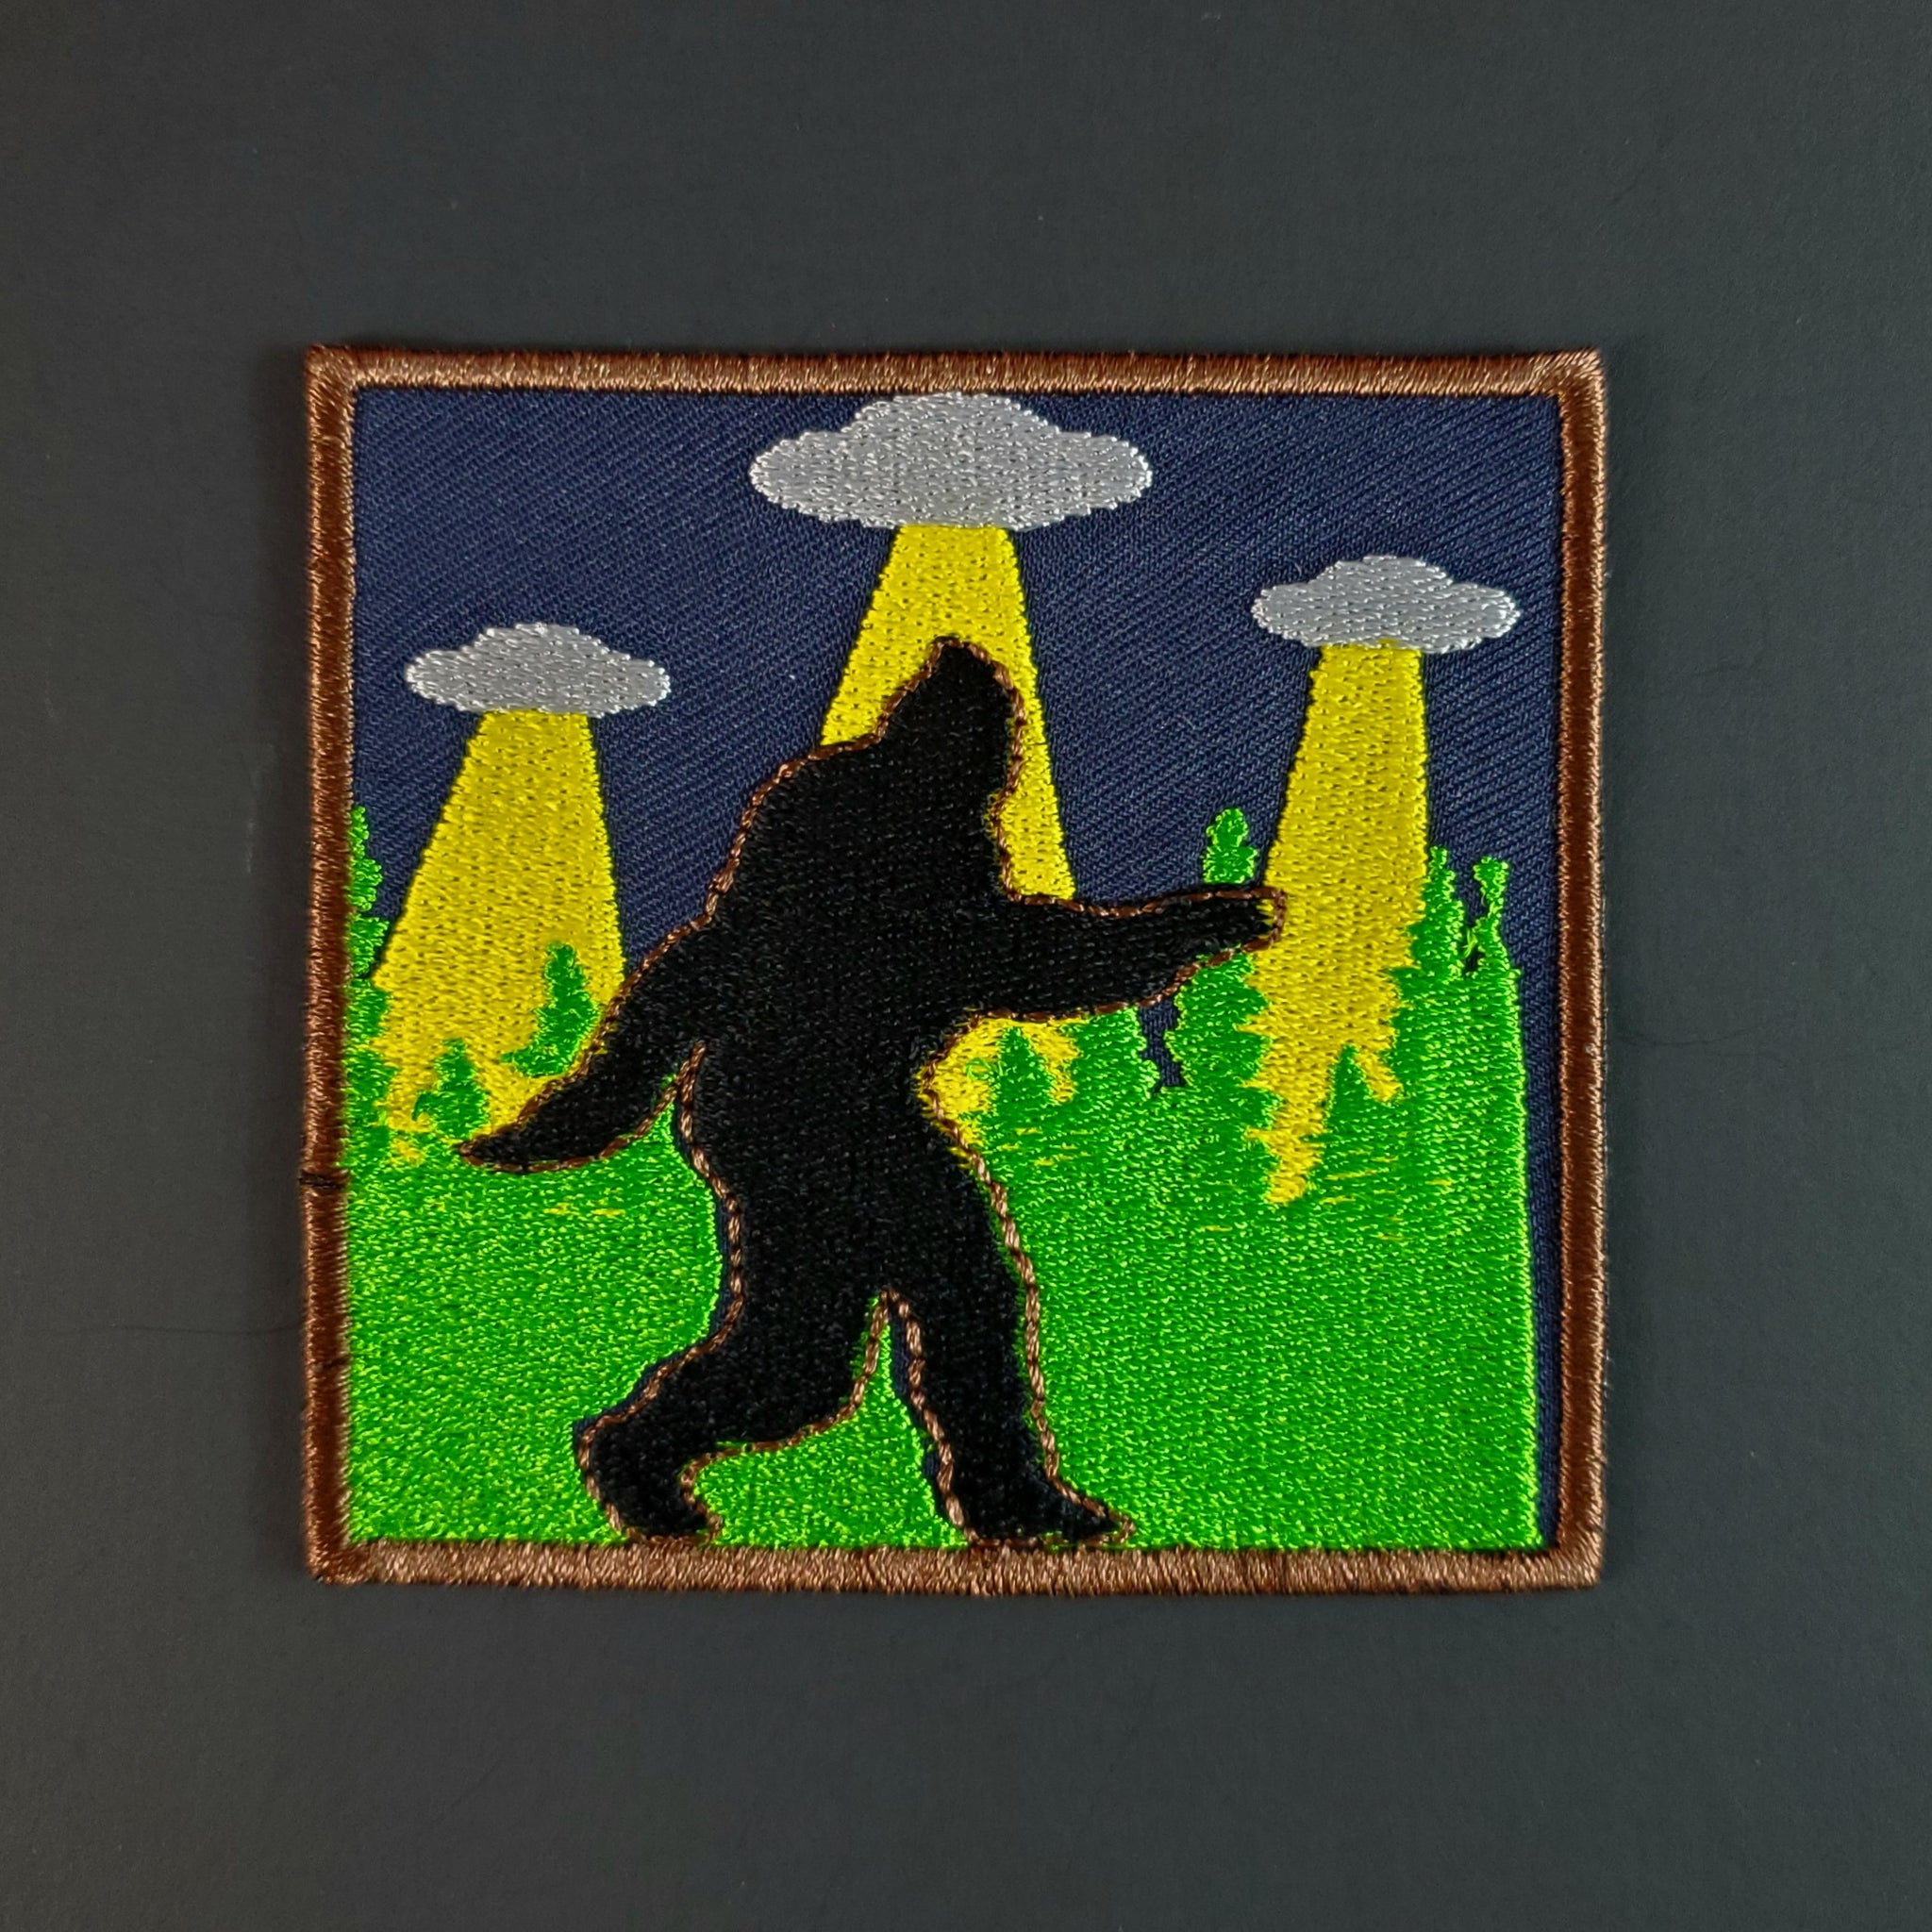 embroidered patch of Sasquatch walking silhouette against background of green forest trees and three UFOs in the night sky